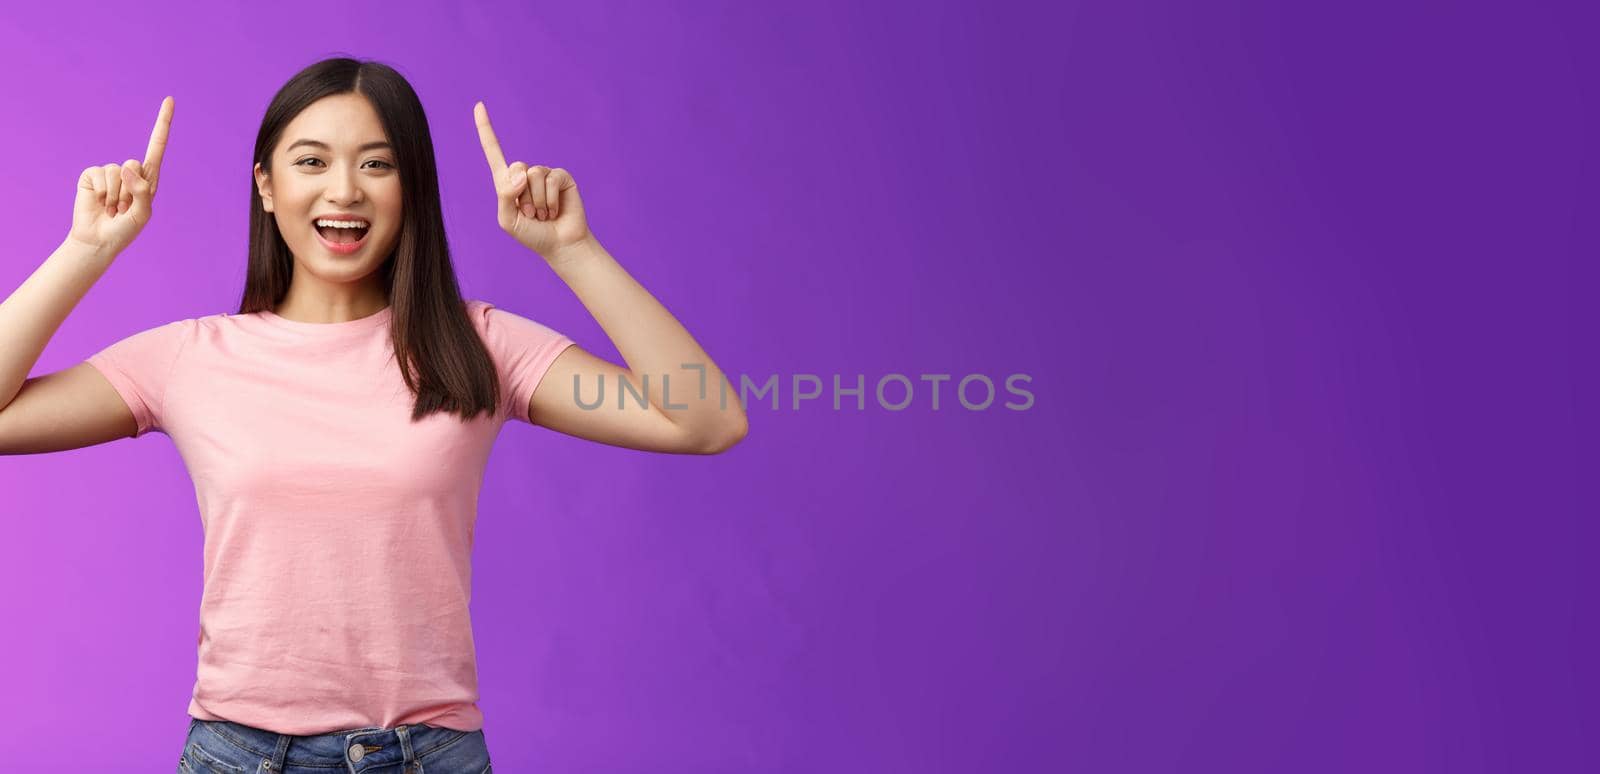 Charismatic good-looking lively smiling asian girl introduce product, pointing fingers up, indicate top advertisement, grinning toothy, excited telling good news, sharing link, purple background.